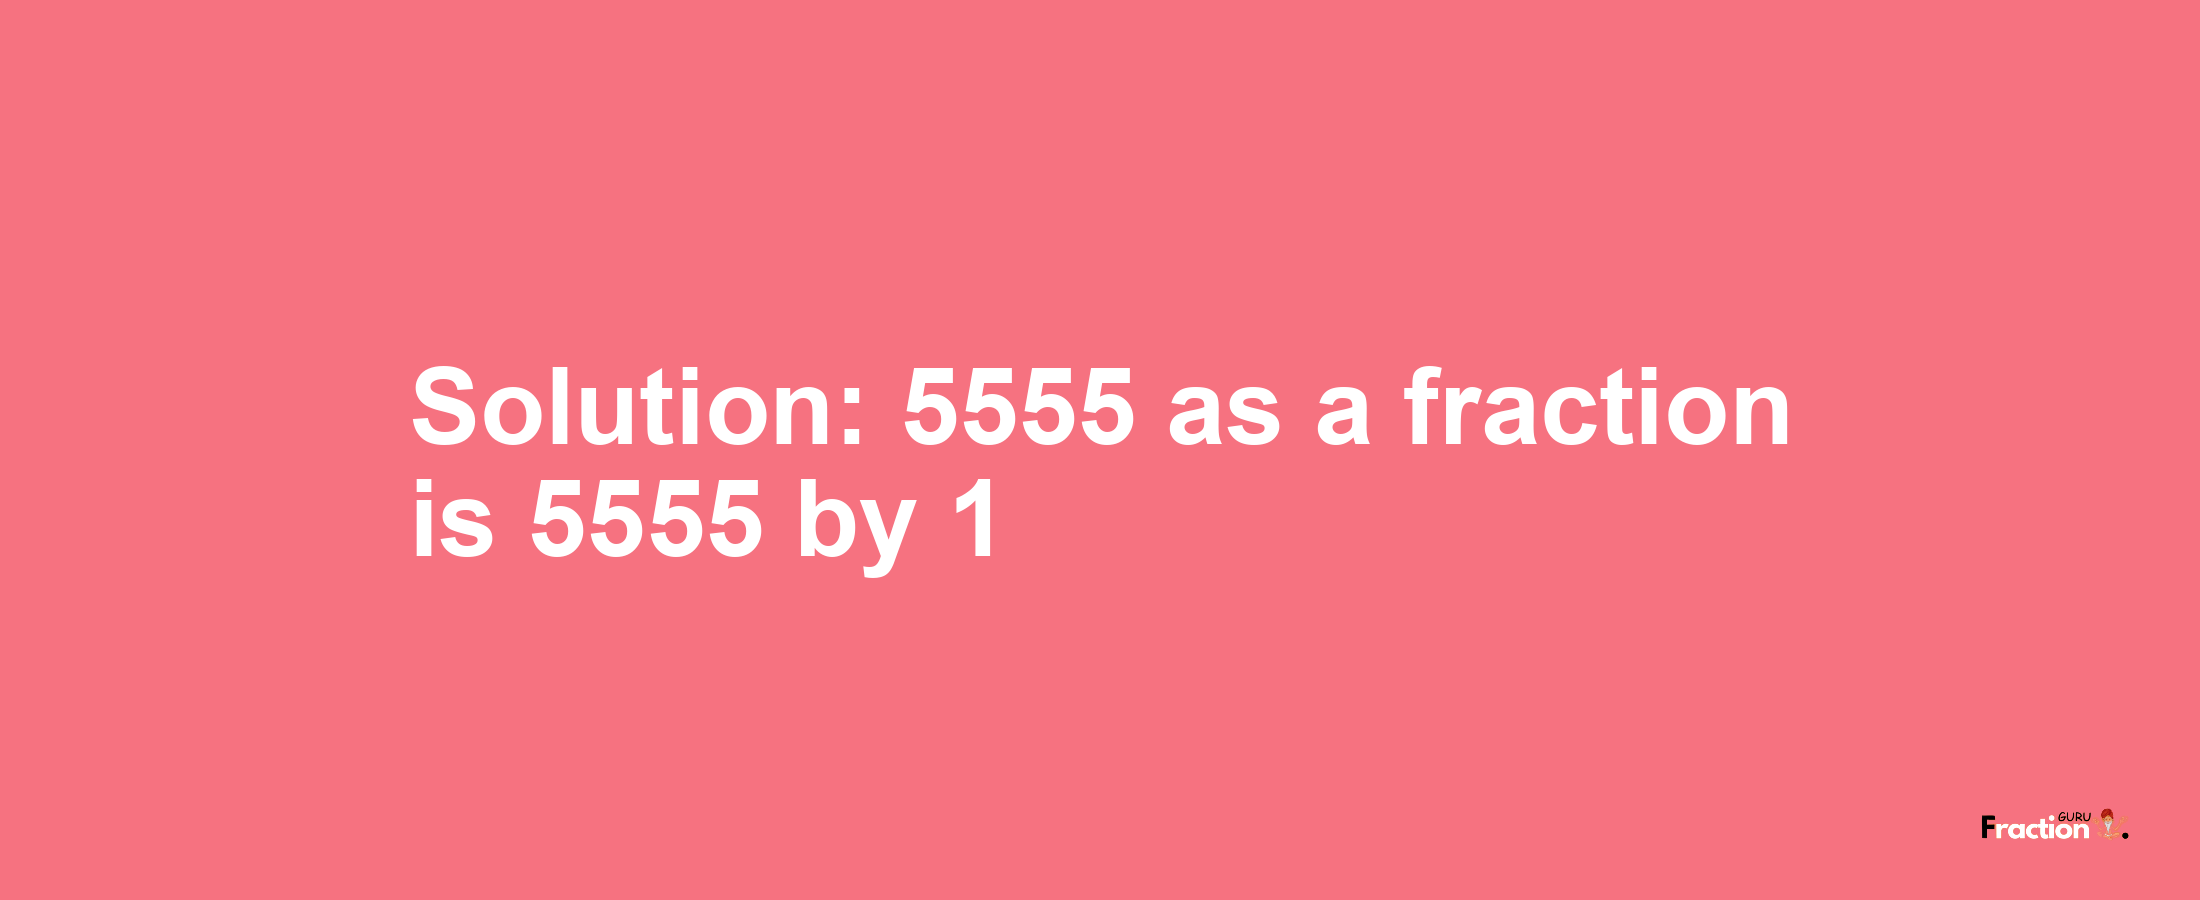 Solution:5555 as a fraction is 5555/1